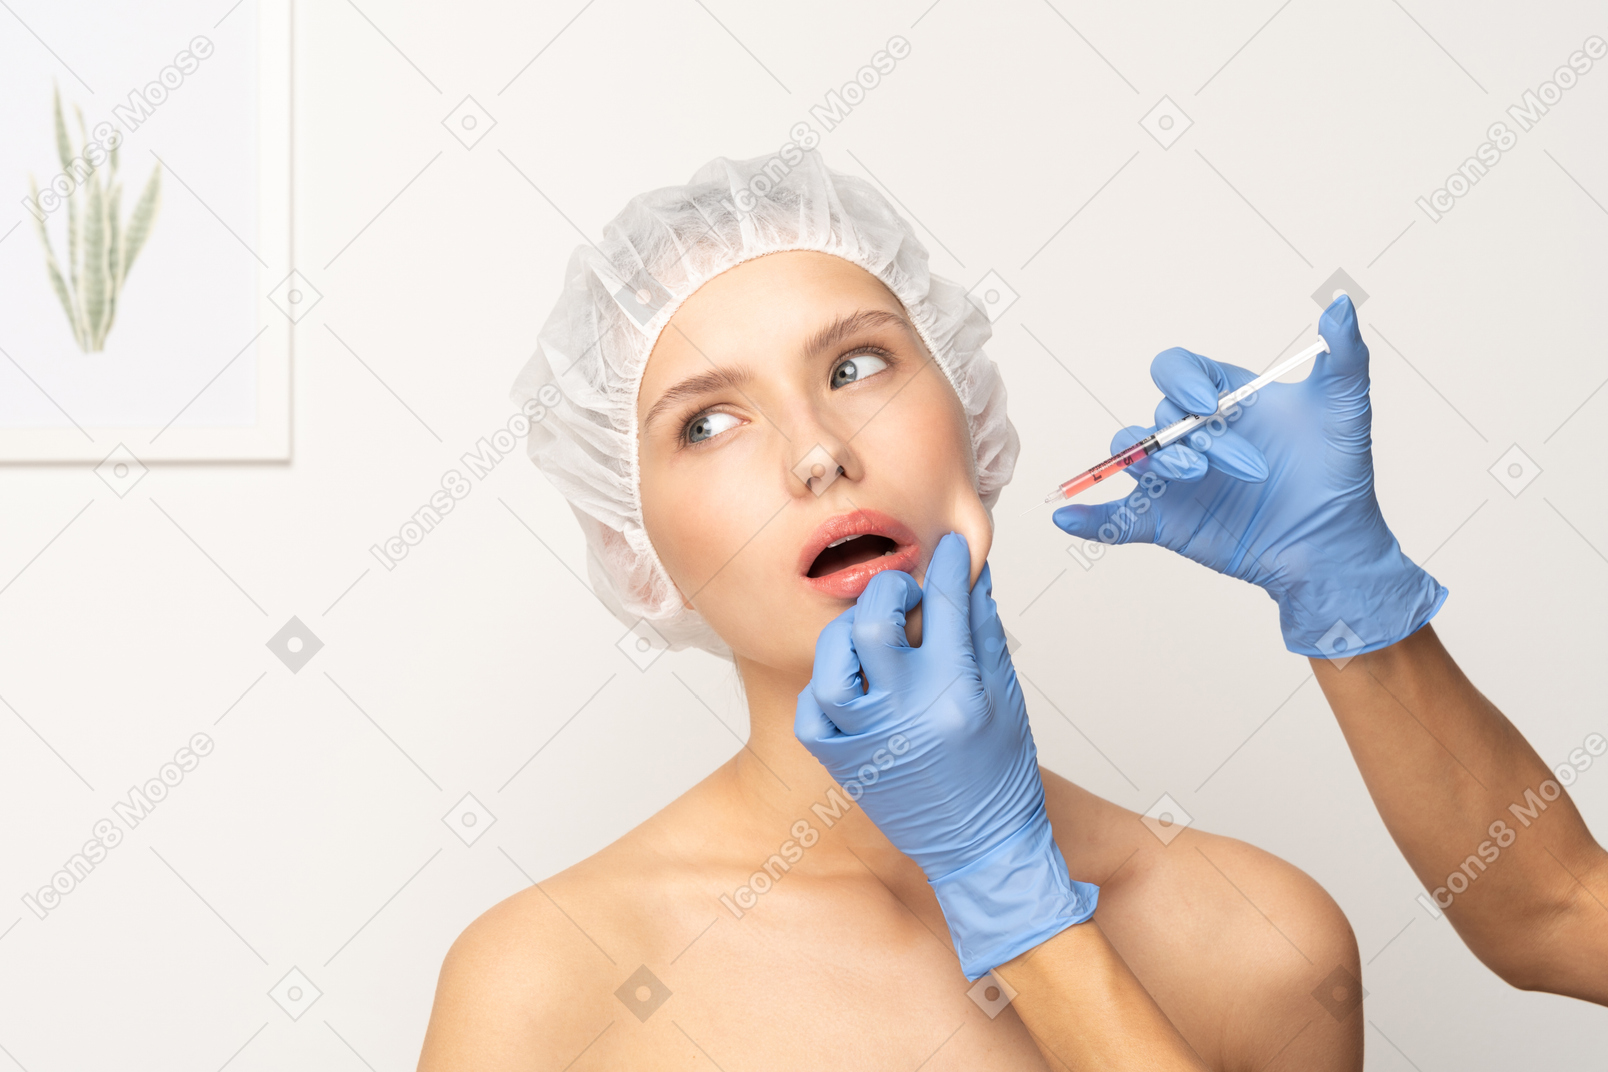 Young woman having her face injected with botox